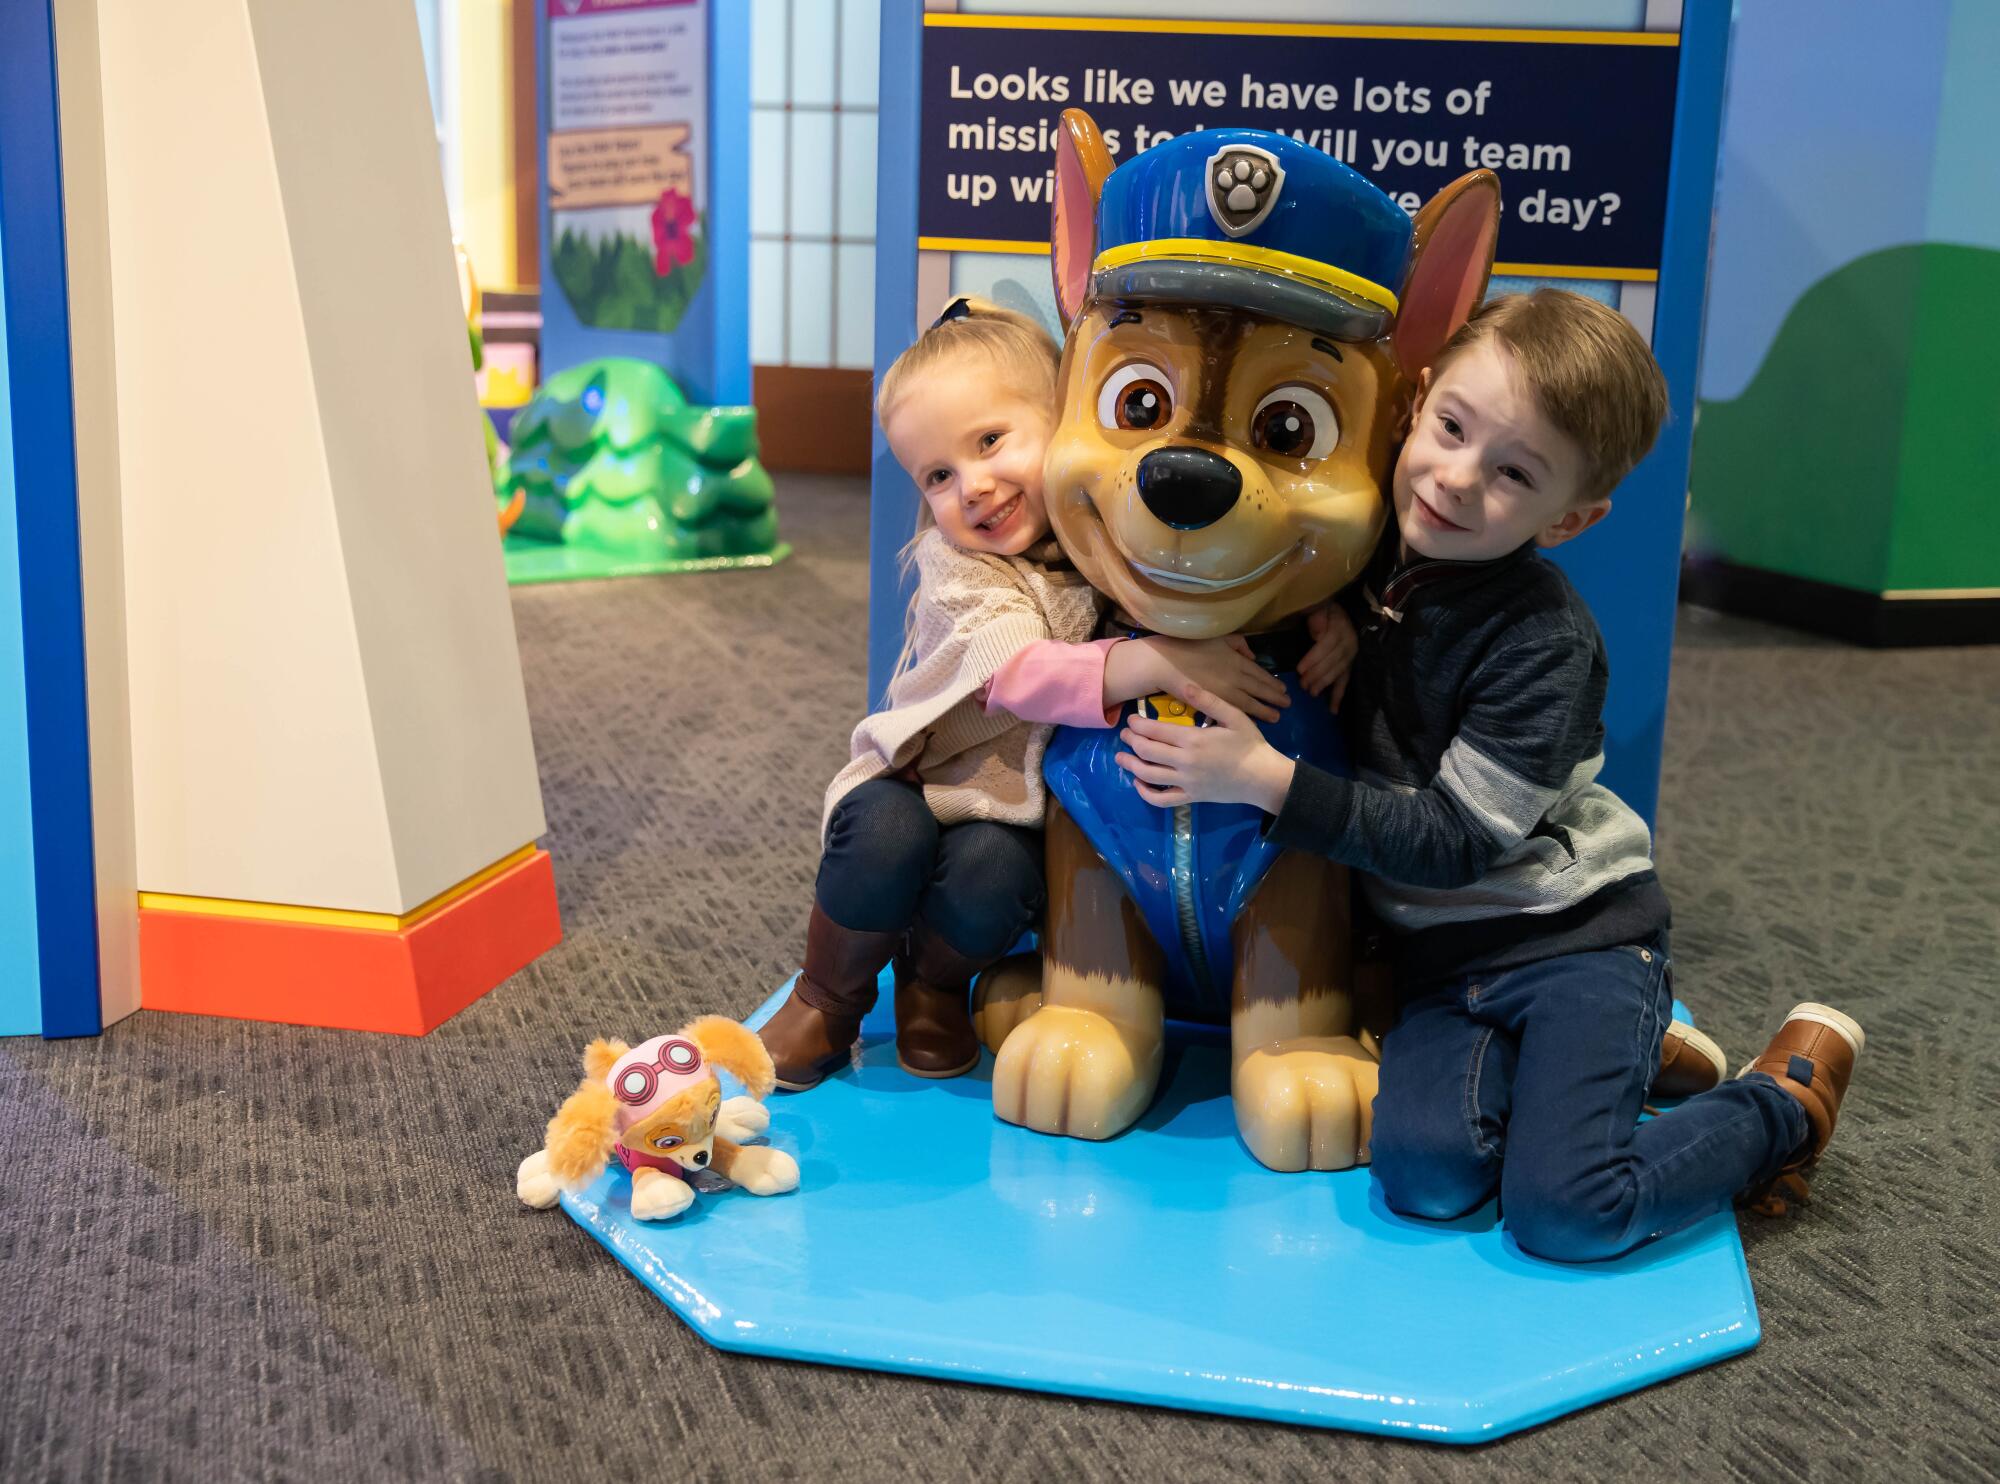 Two young children hug a small statue of a dog dressed as a police officer